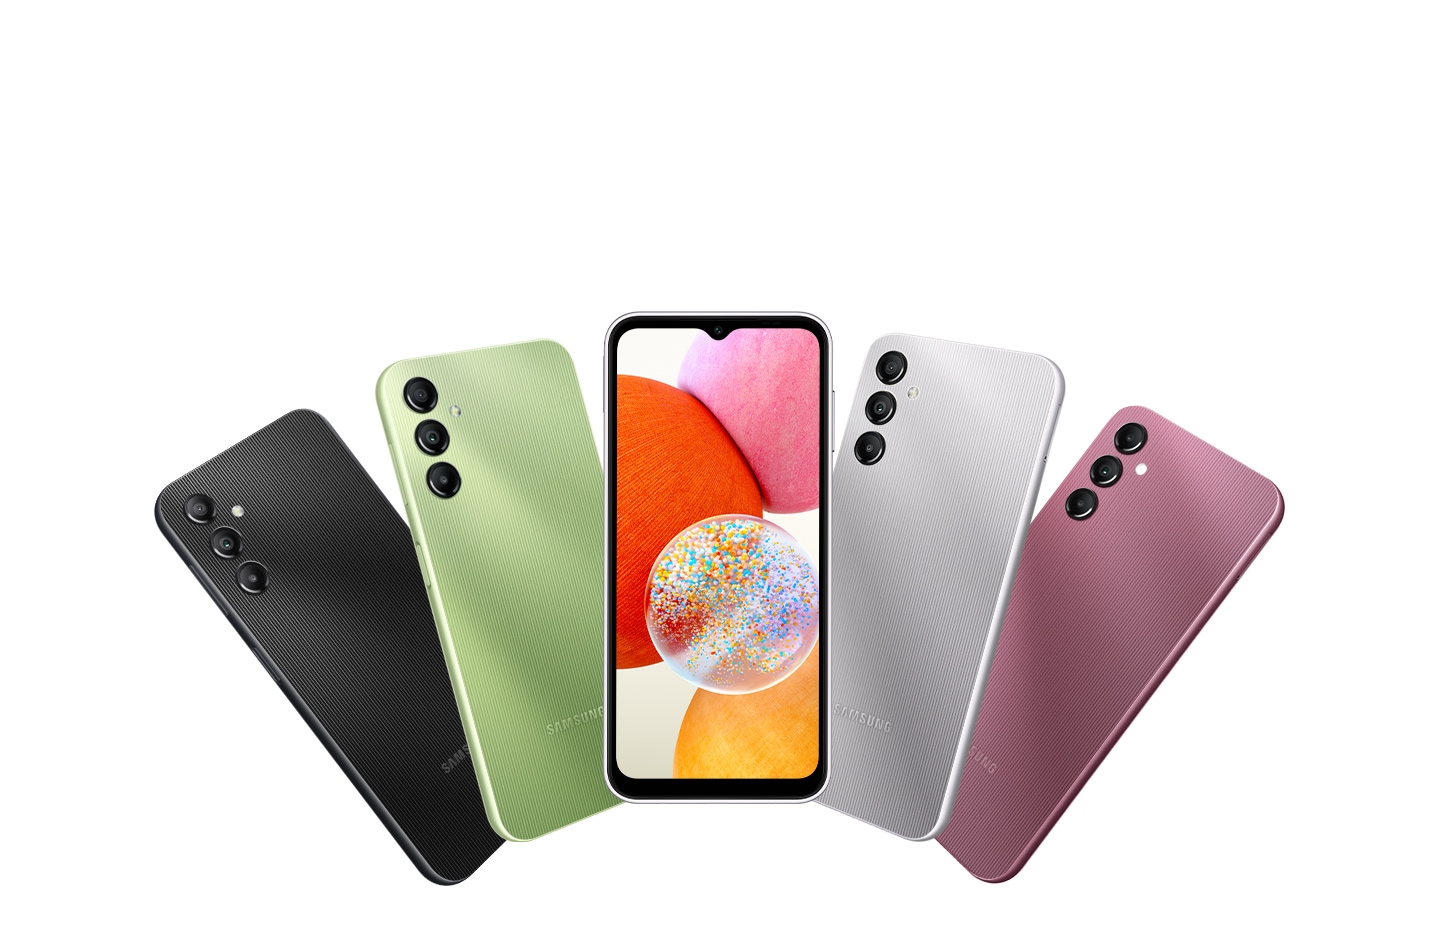 Five Galaxy A14 devices are shown to showcase the availability of various color options. Four of them are back-facing to show their colors from Black, Light Green, Silver, and Dark Red. The other front-facing device is positioned in the middle with colorful balls being displayed on its screen.